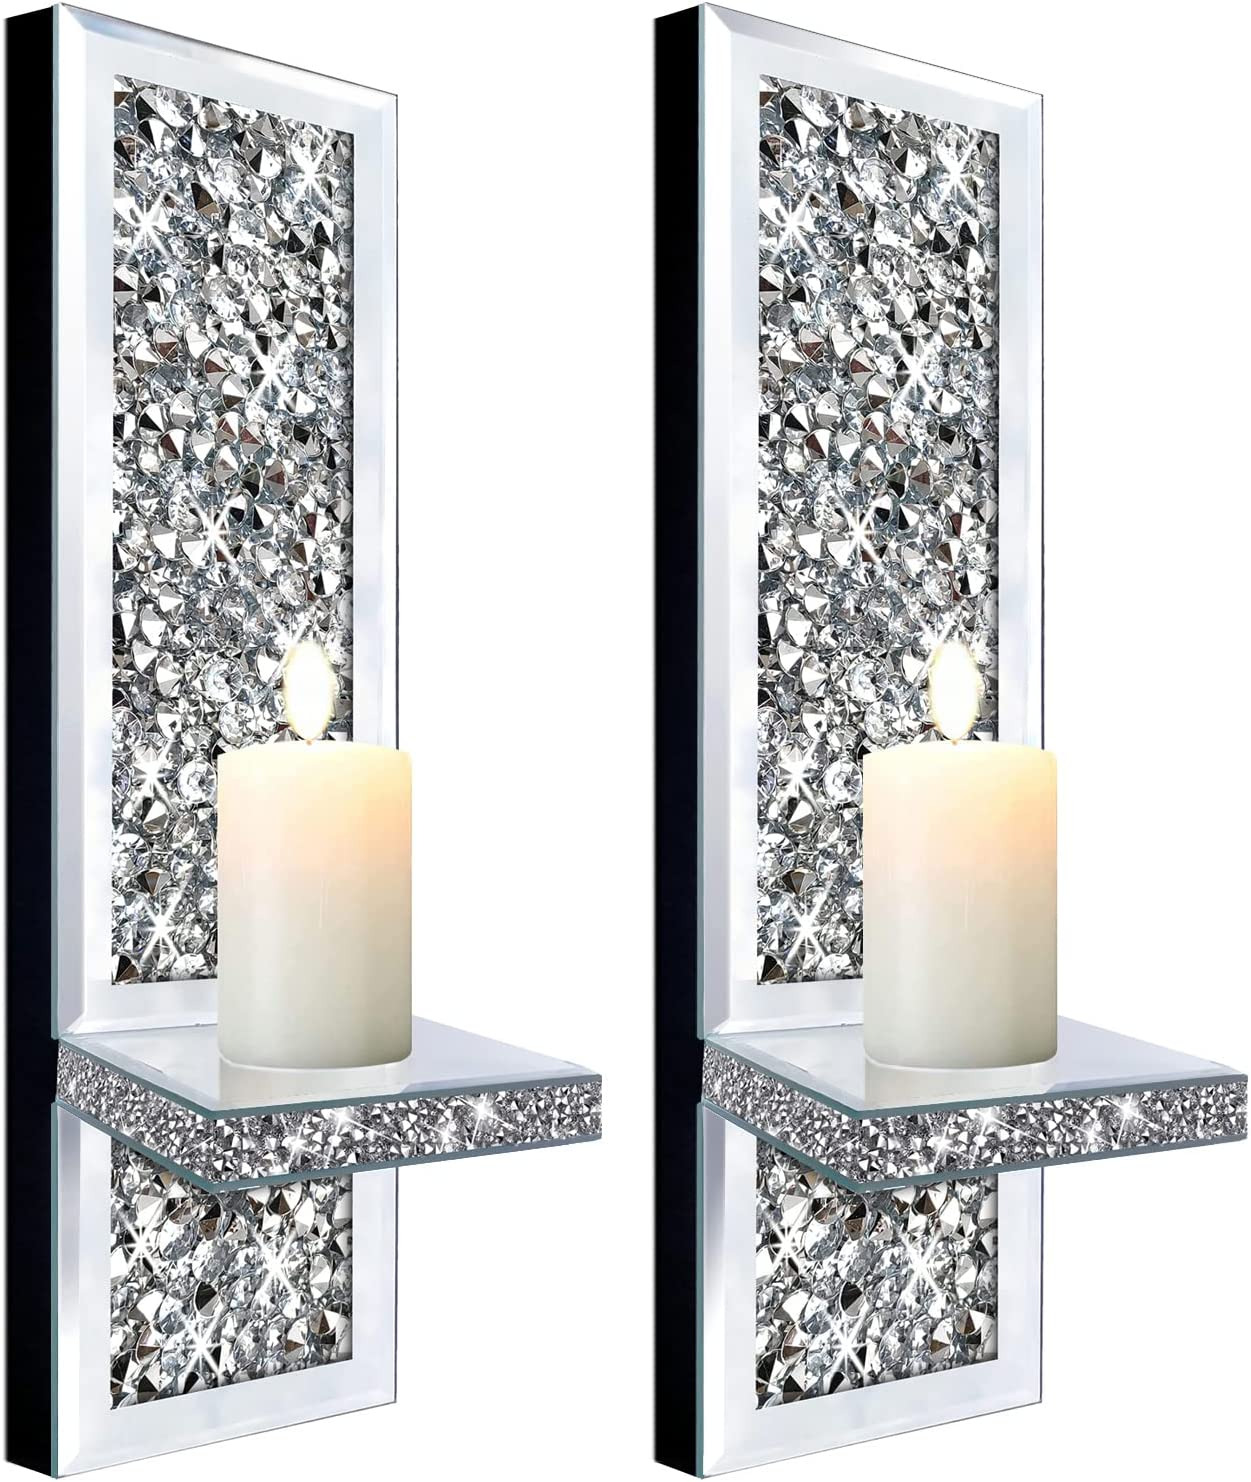 Set of 2 Crystal Crush Diamond Candle Sconces Gorgeous Silver Mirrored Wall Scon